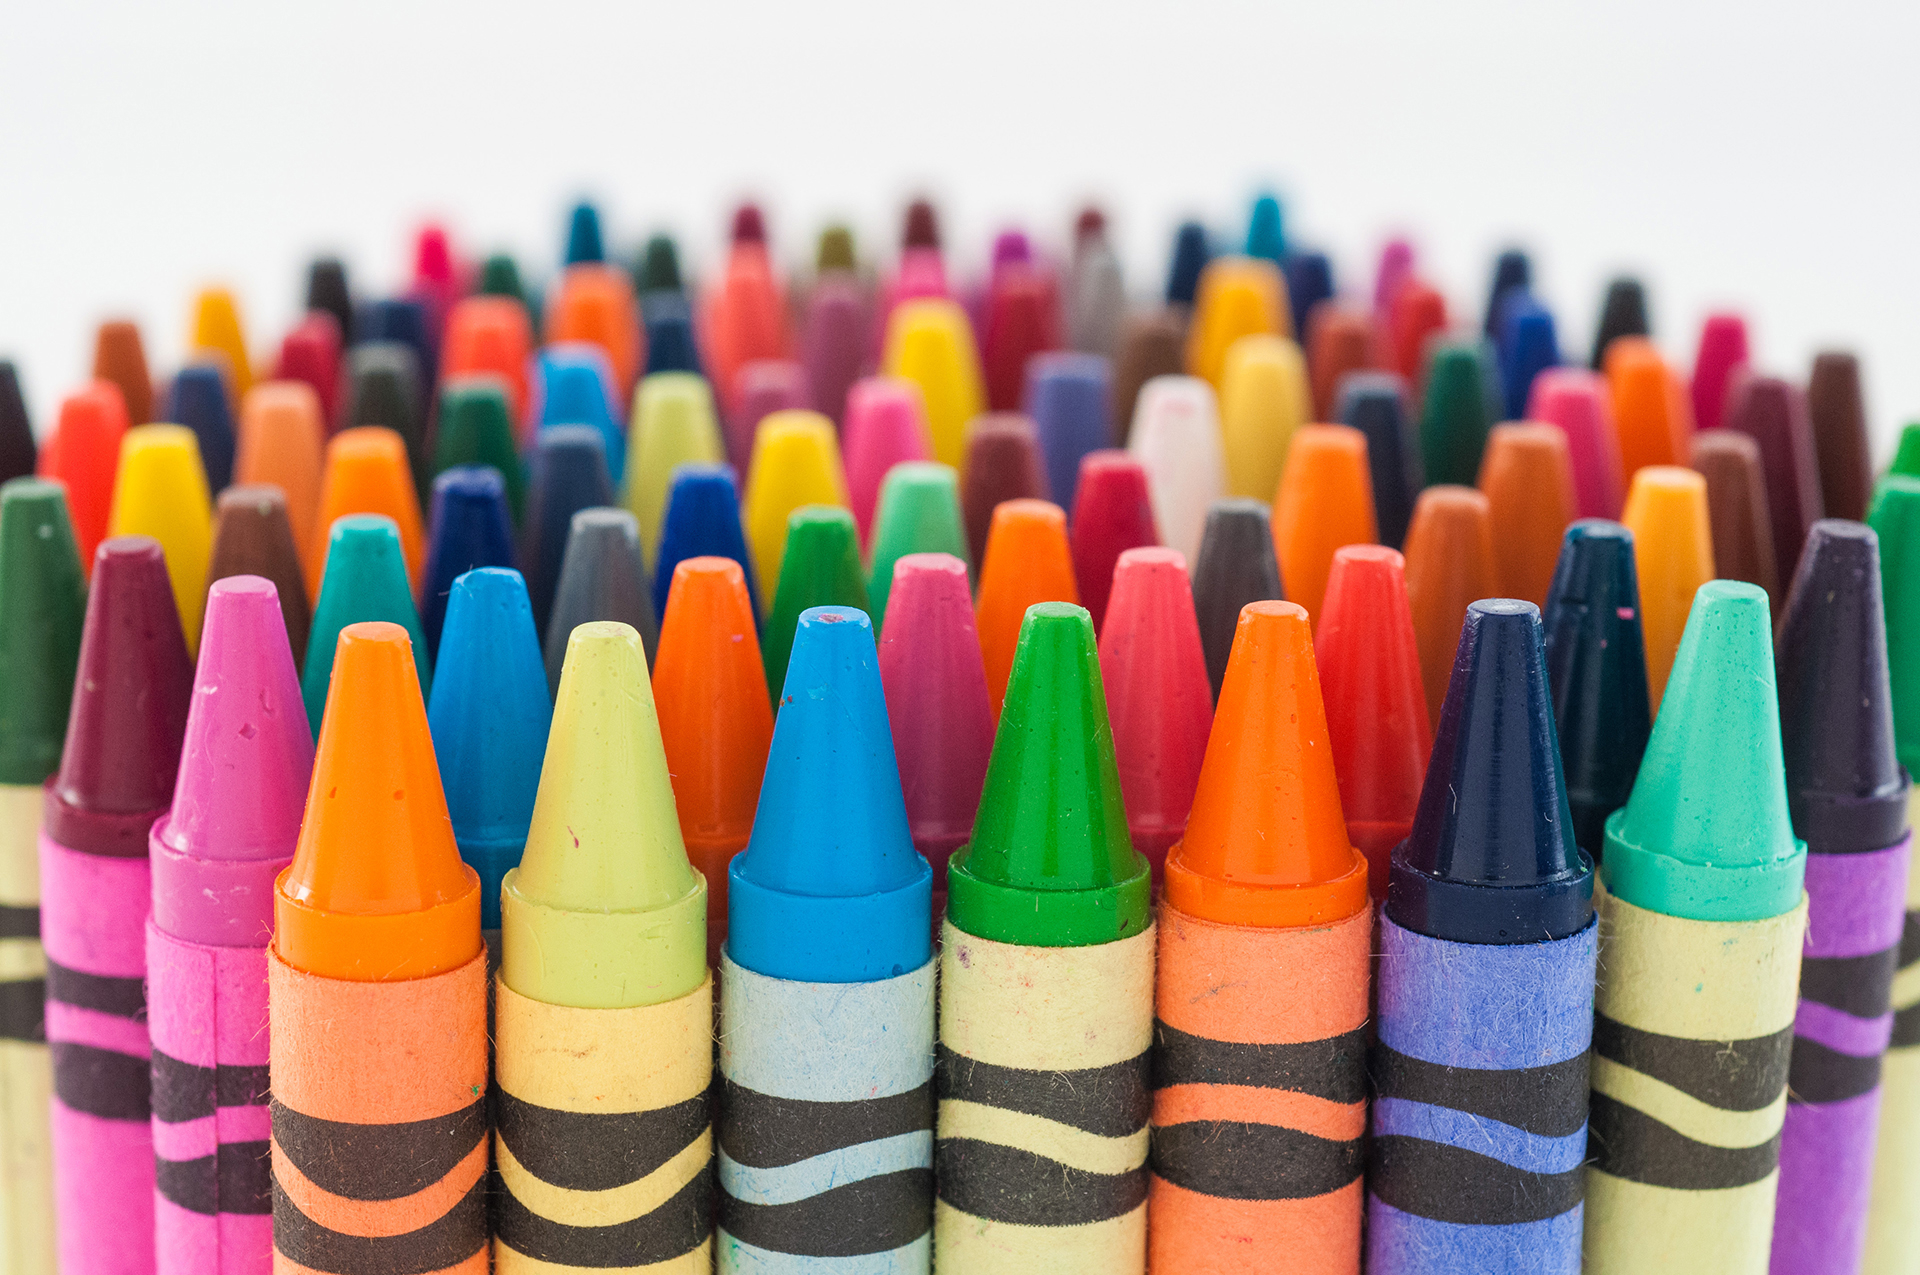 1920px x 1275px - Crayola: Crayon Brand's Facebook Page Hacked, Flooded With Porn - Hype MY